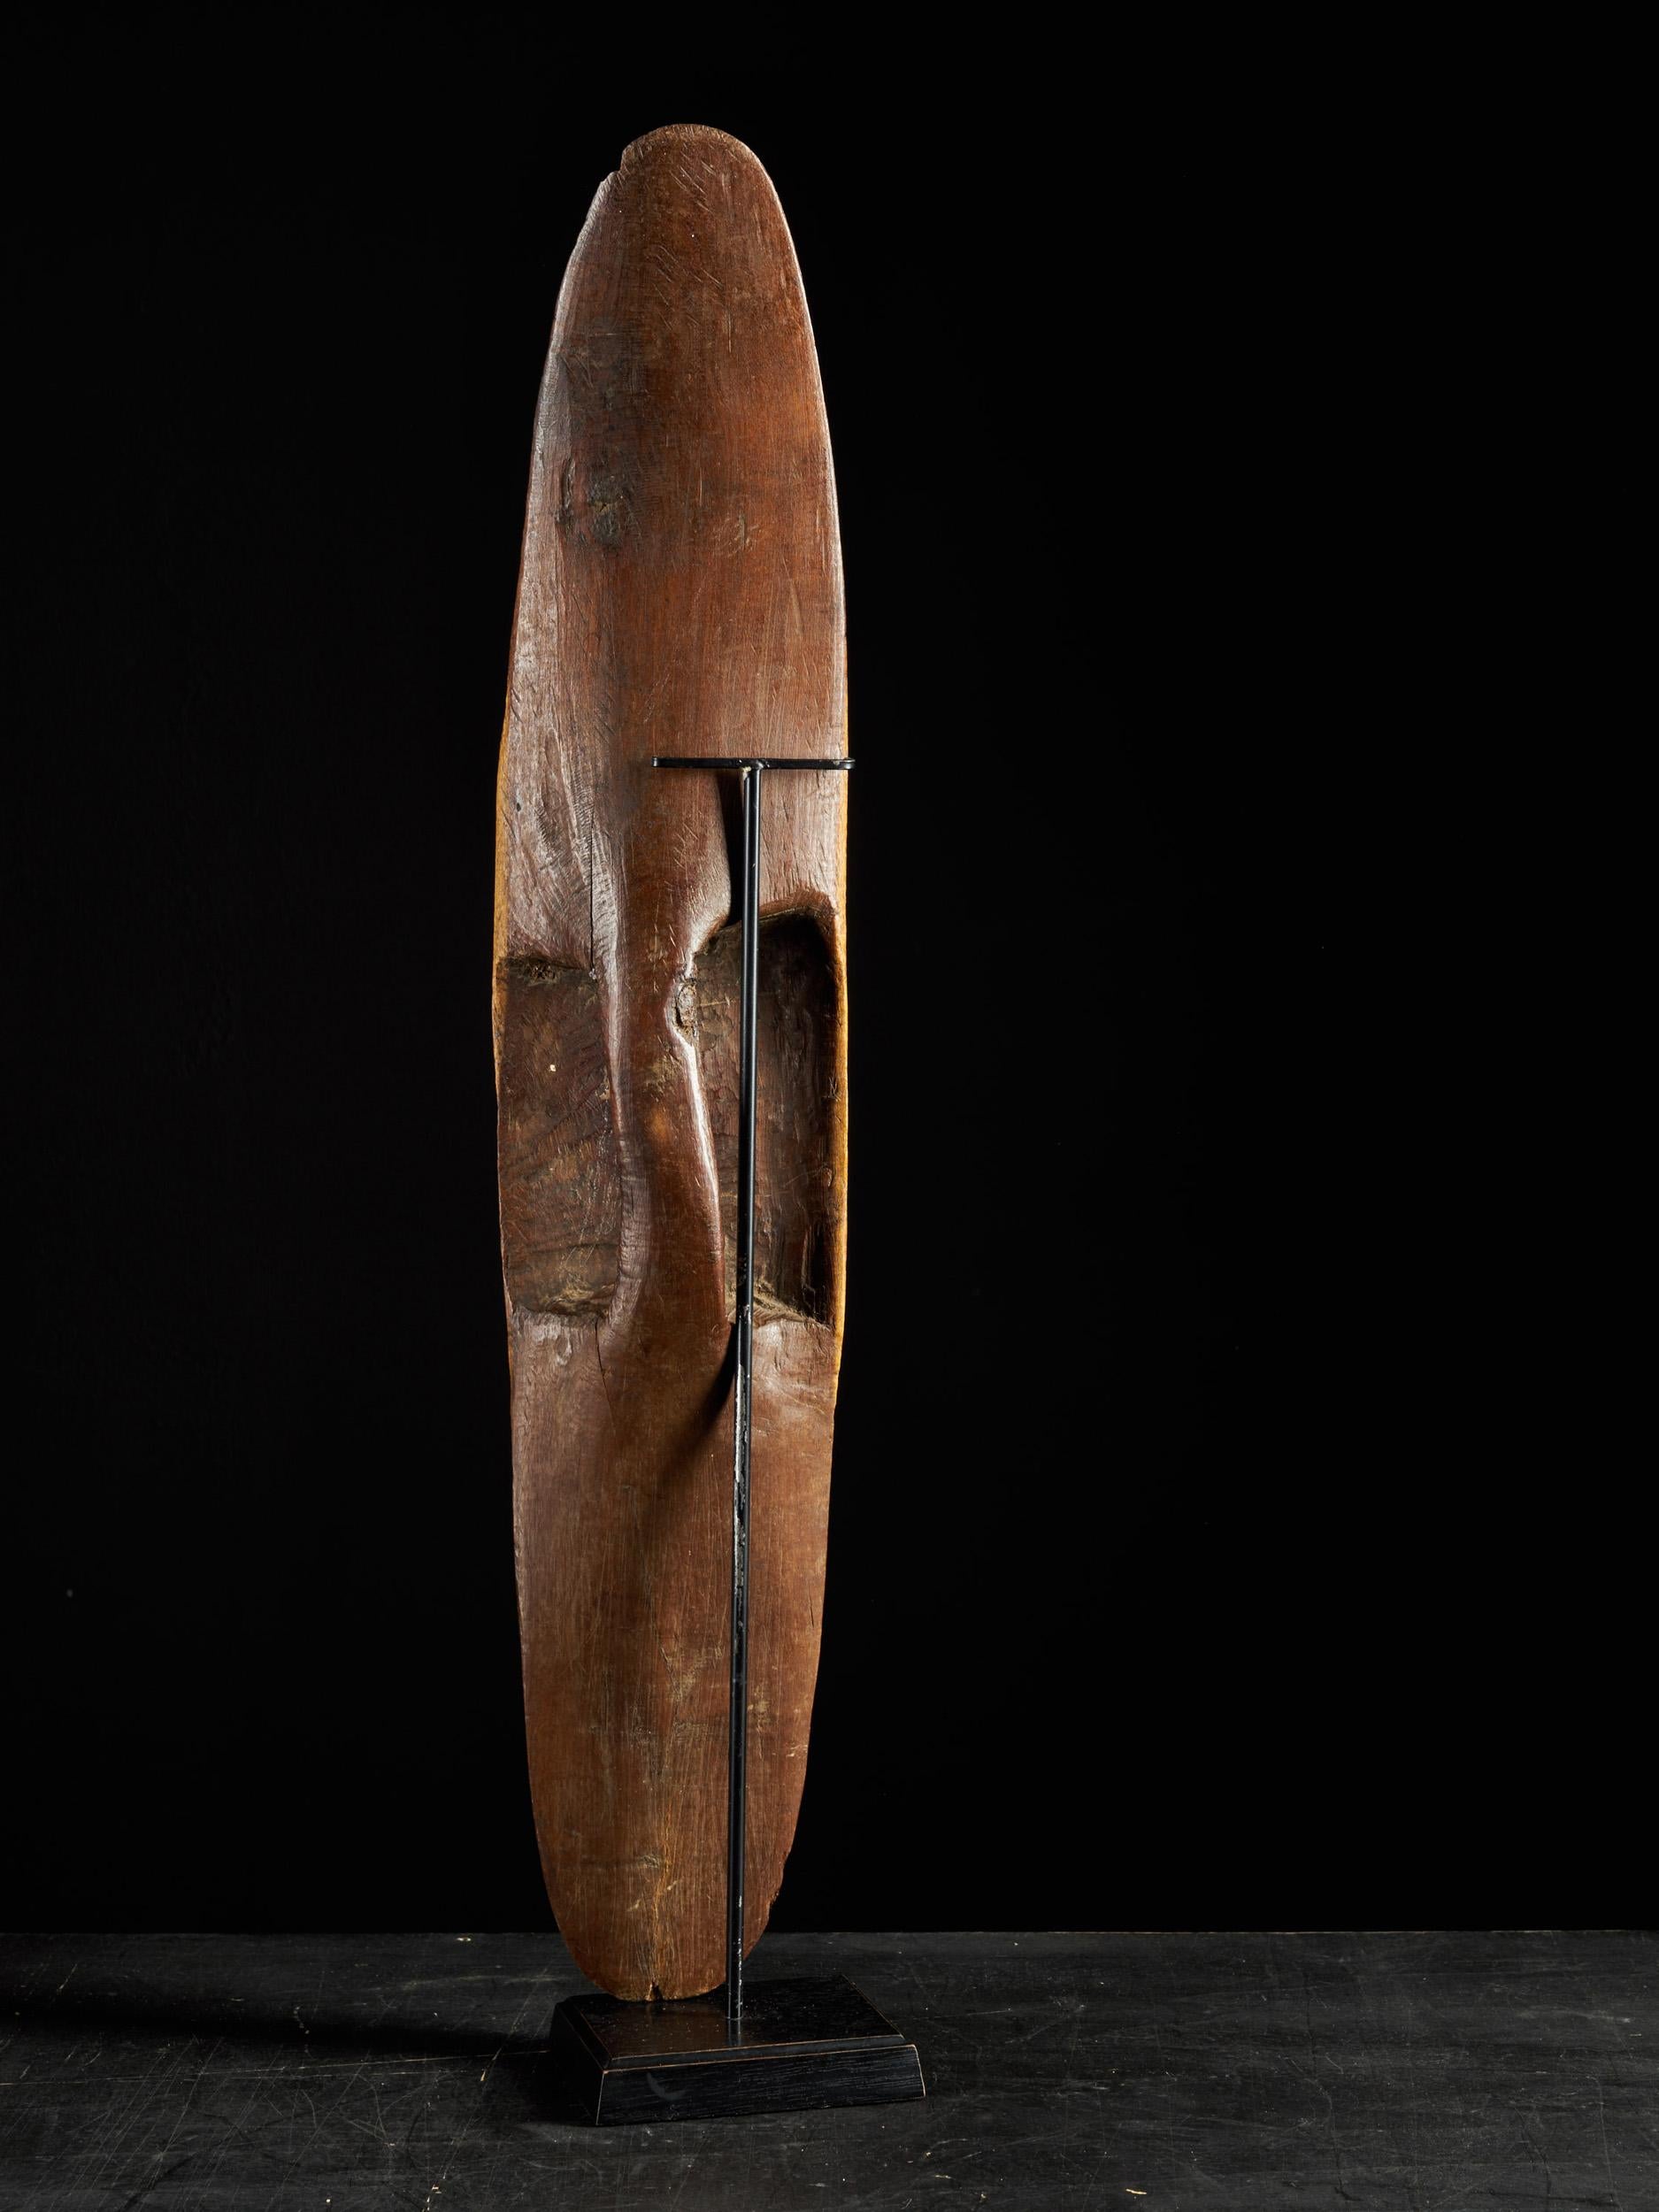 20th Century Set of Australian Aboriginal Items with Spear Thrower, Shield and Boomerang